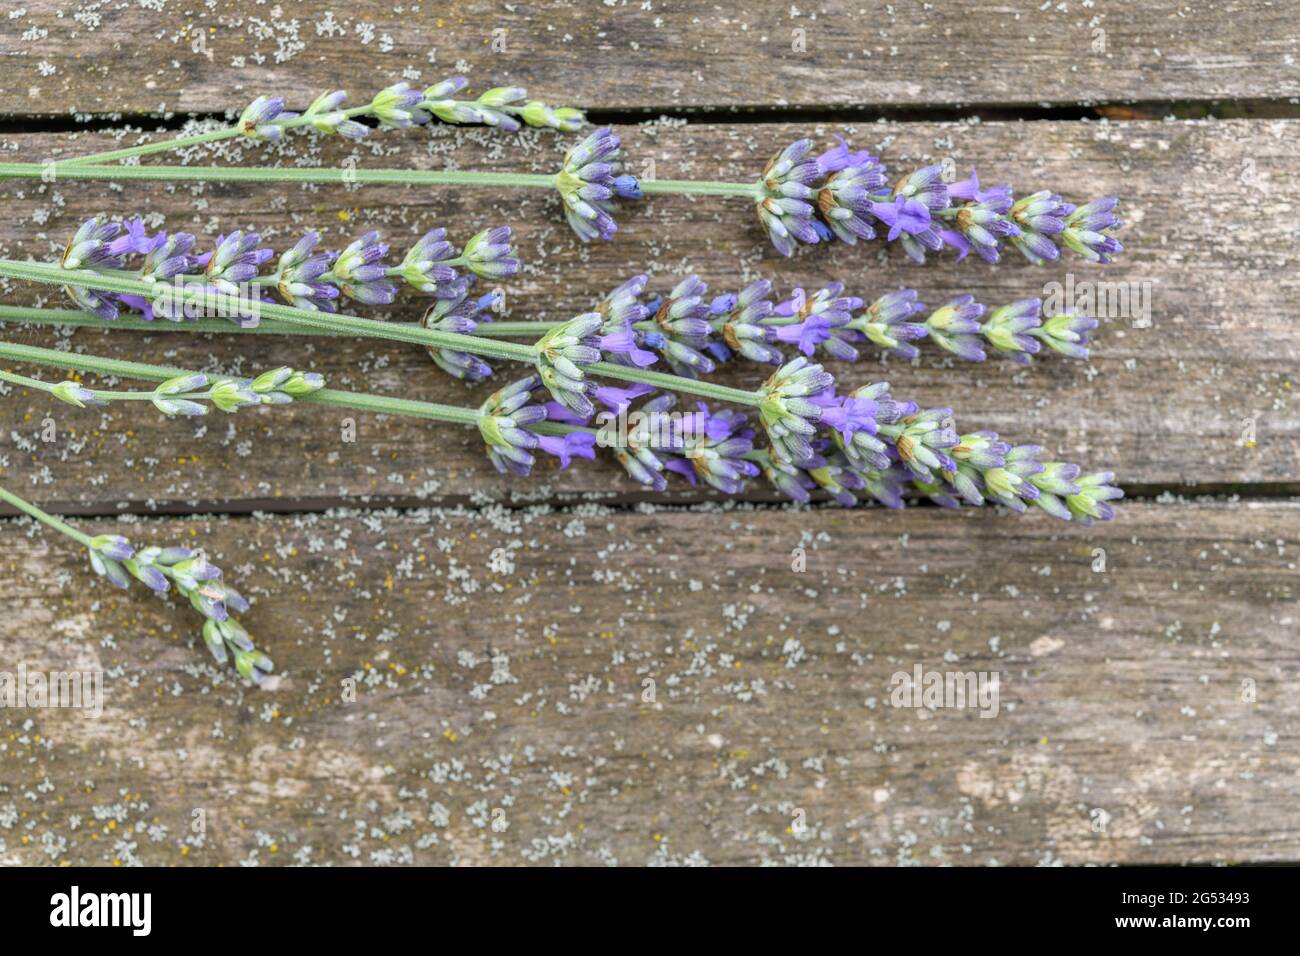 Bouquet of lavender on a wooden garden table. France. Stock Photo